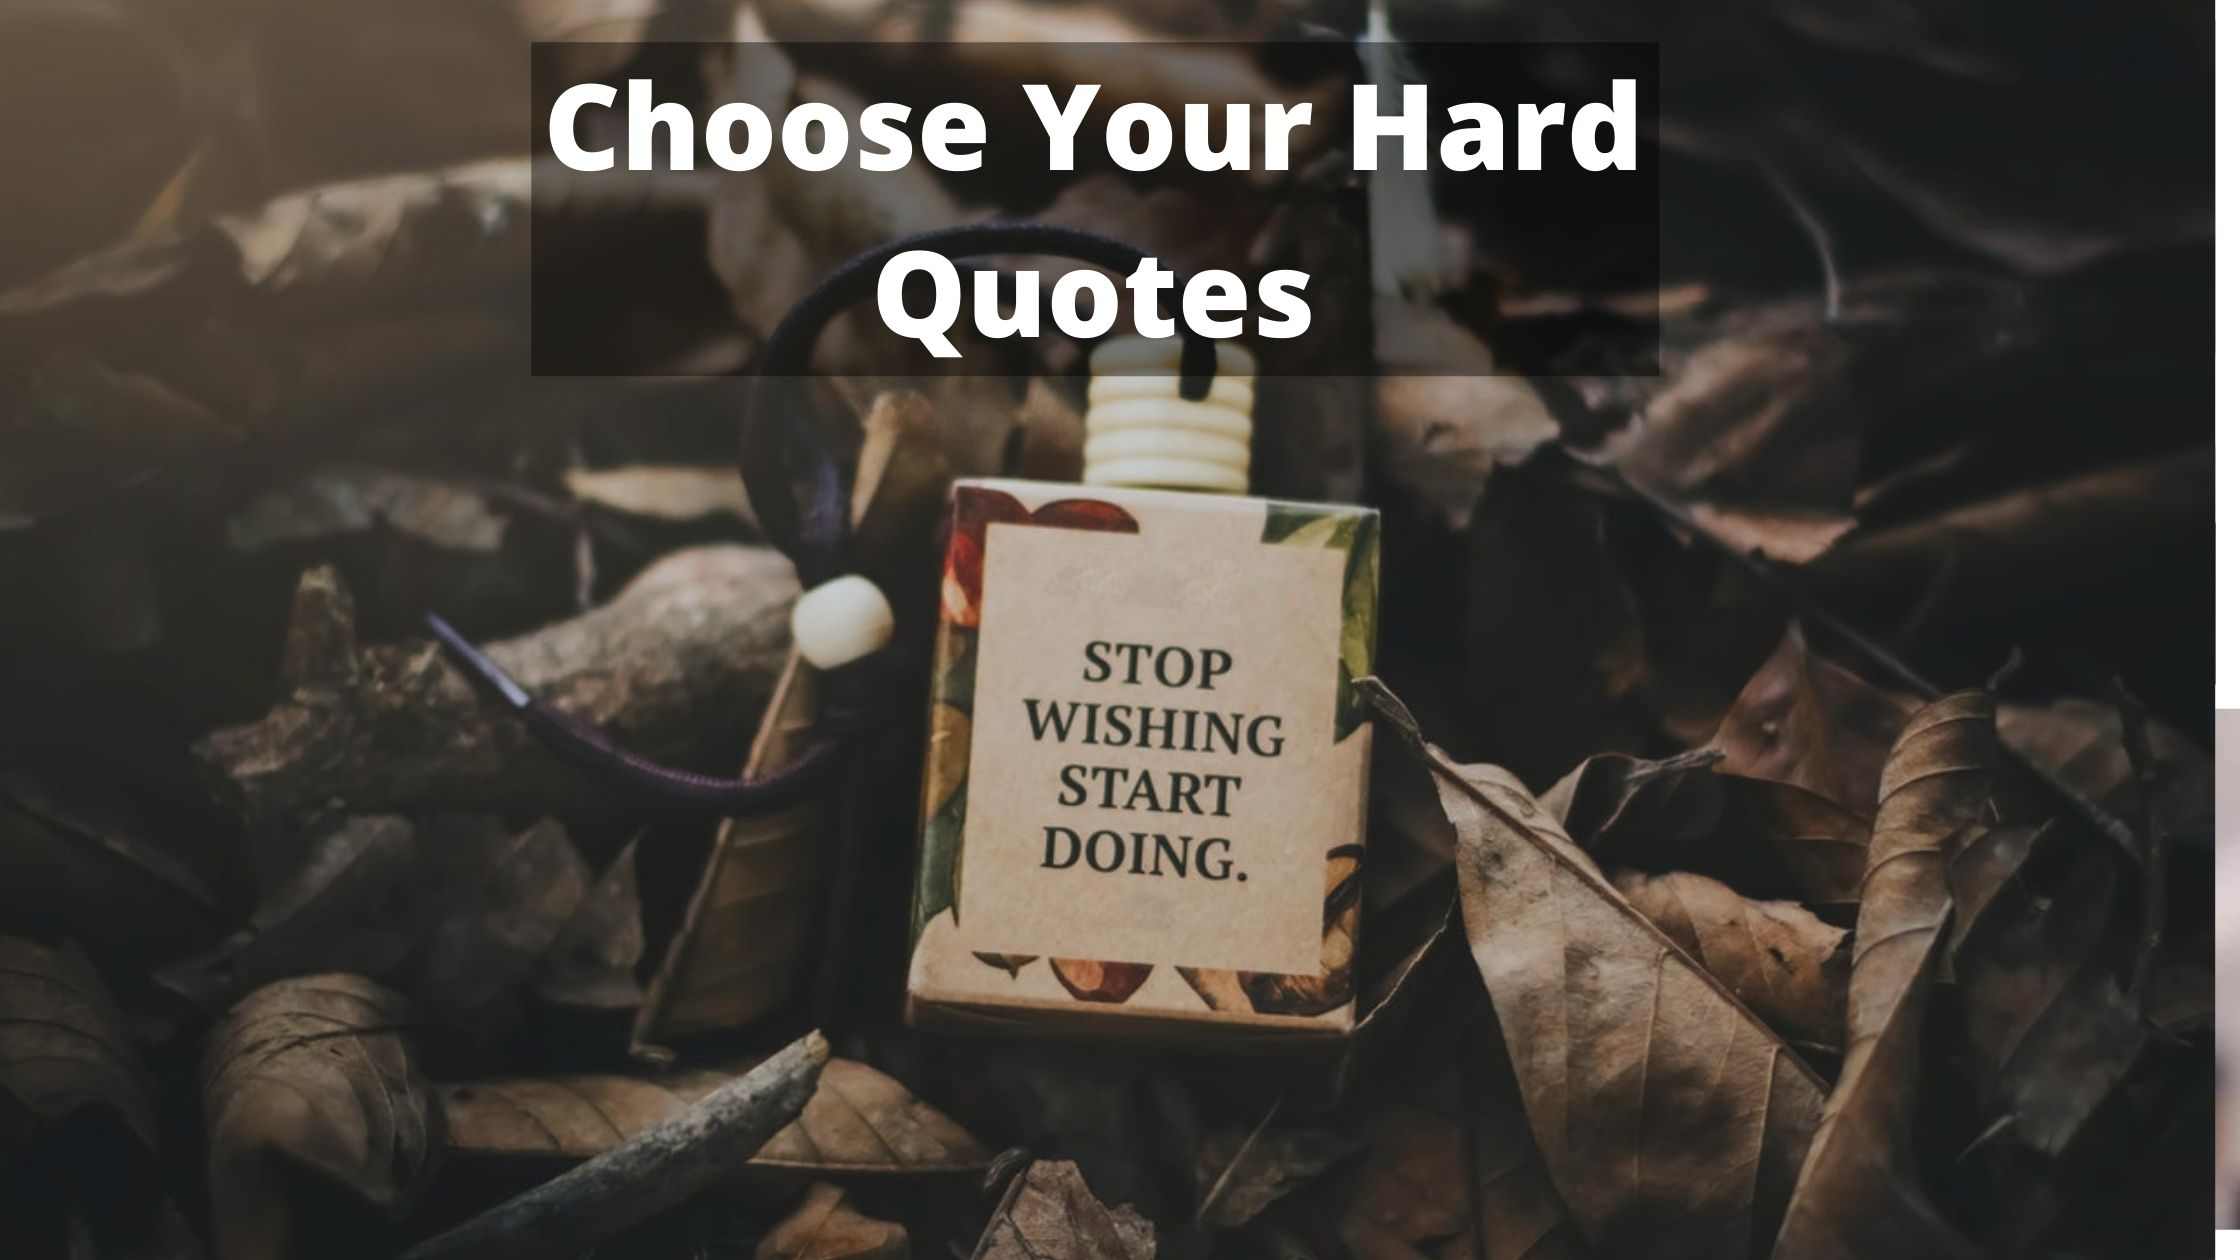 100+ of the Best "Choose Your Hard" Quotes for 2022